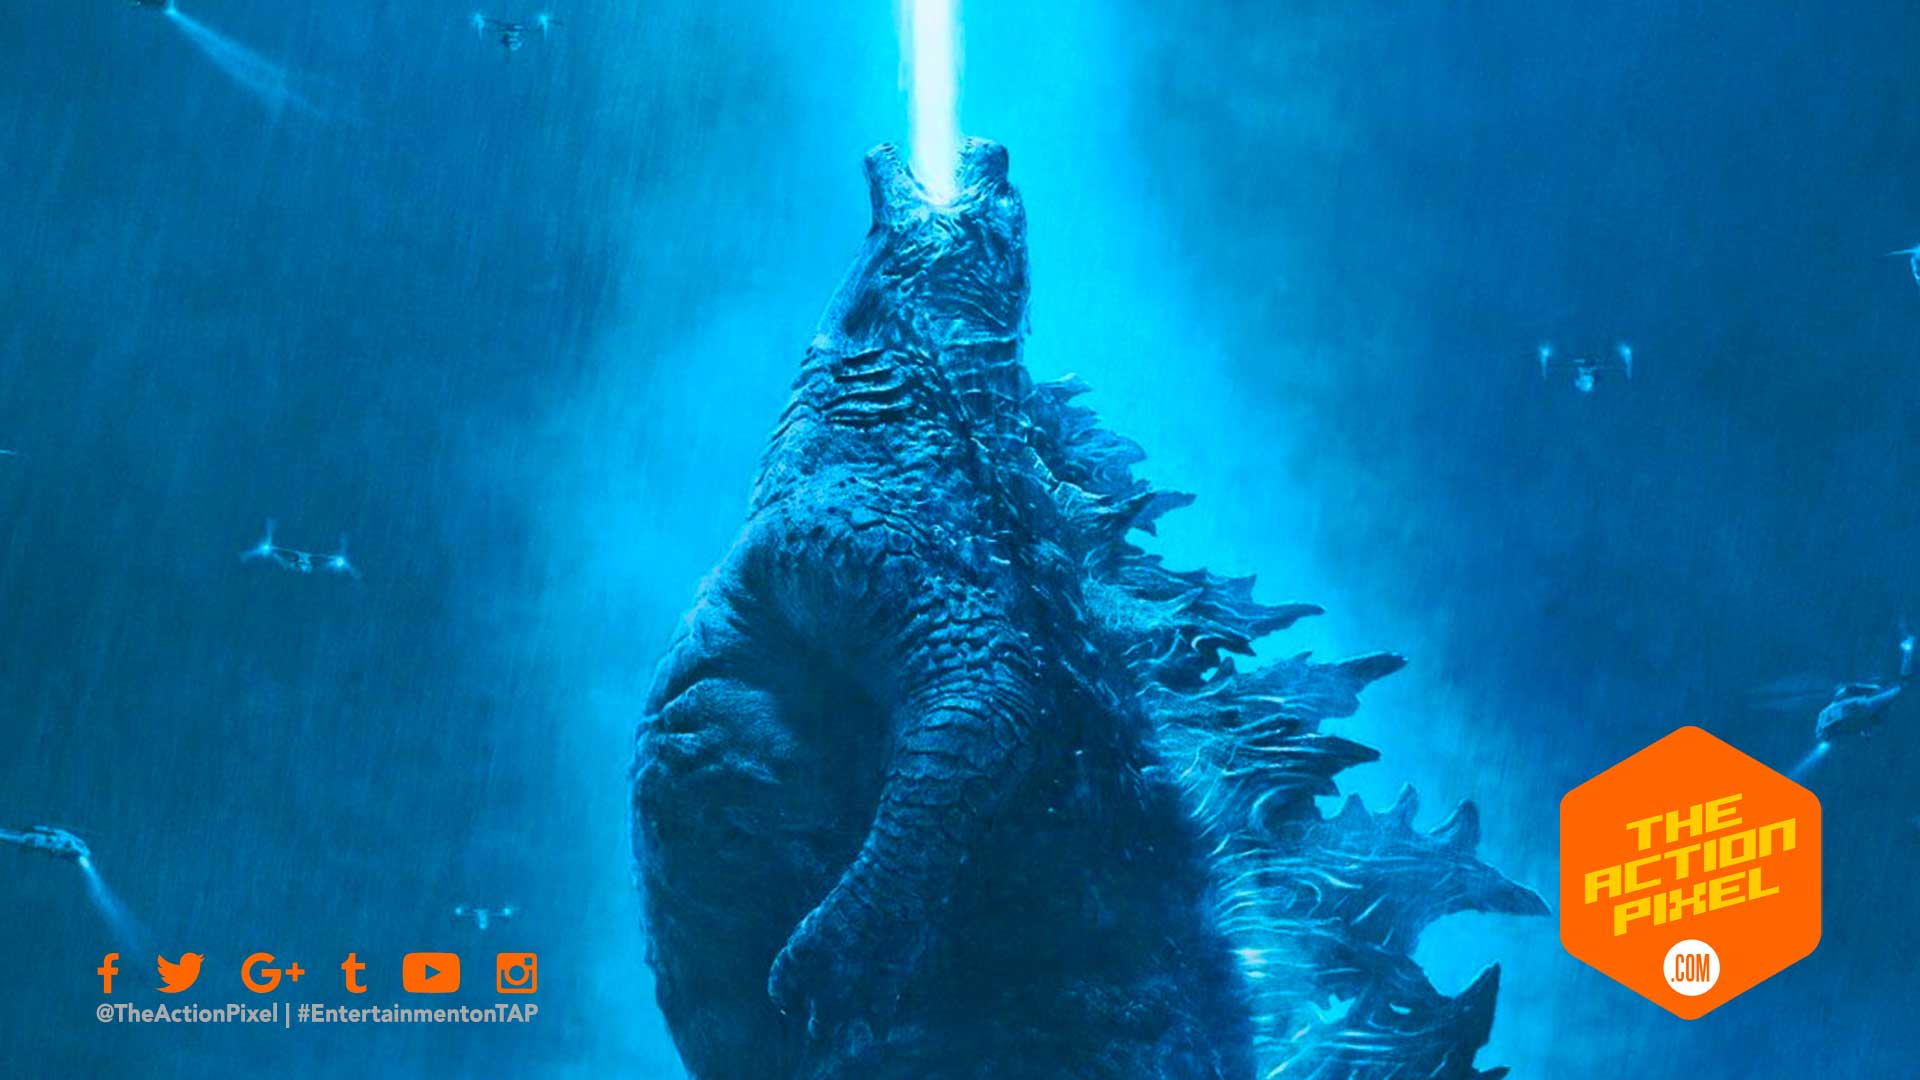 Godzilla: King Of The Monsters” unleashes an atomic breath blast in new poster